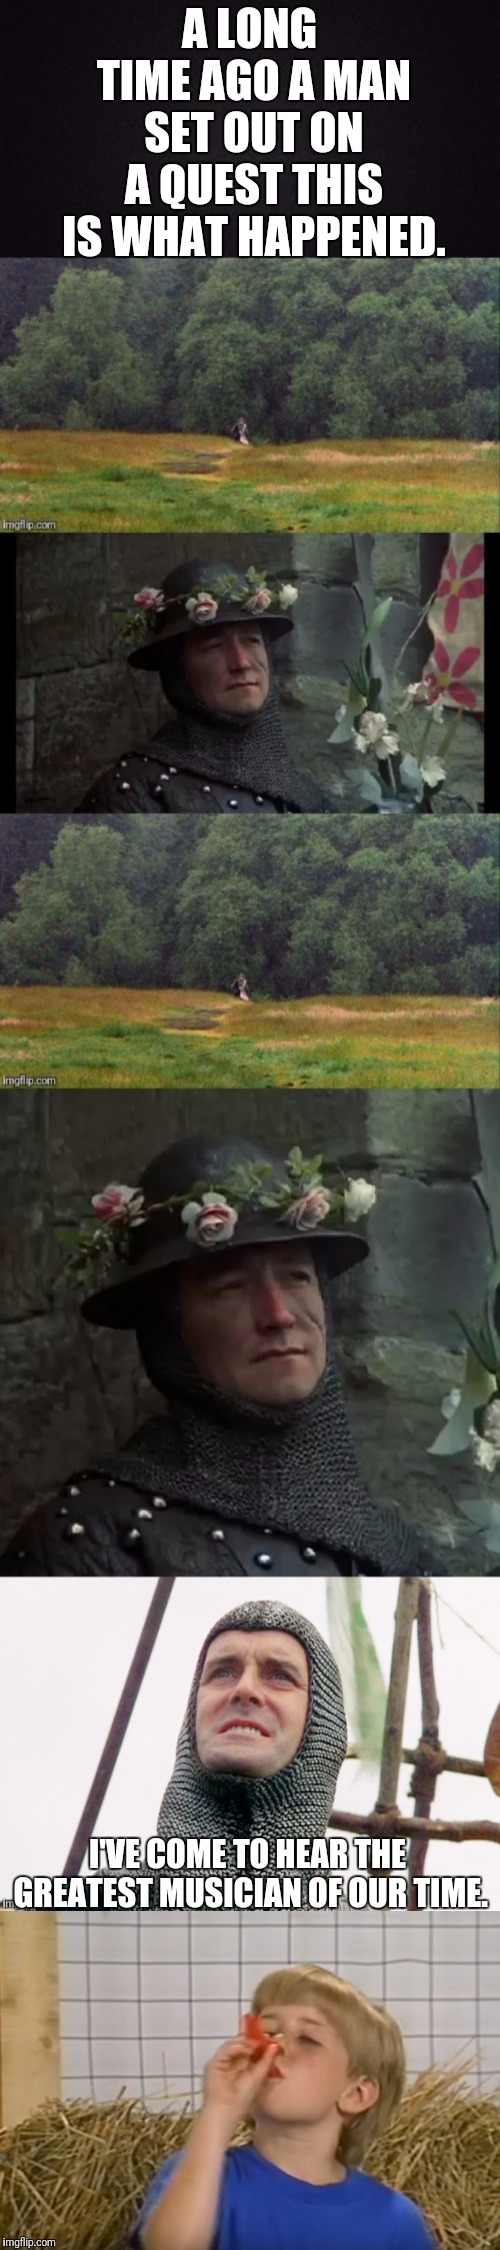 The Quest | A LONG TIME AGO A MAN SET OUT ON A QUEST THIS IS WHAT HAPPENED. I'VE COME TO HEAR THE GREATEST MUSICIAN OF OUR TIME. | image tagged in holy grail,monty python and the holy grail,john cleese,kazoo kid | made w/ Imgflip meme maker